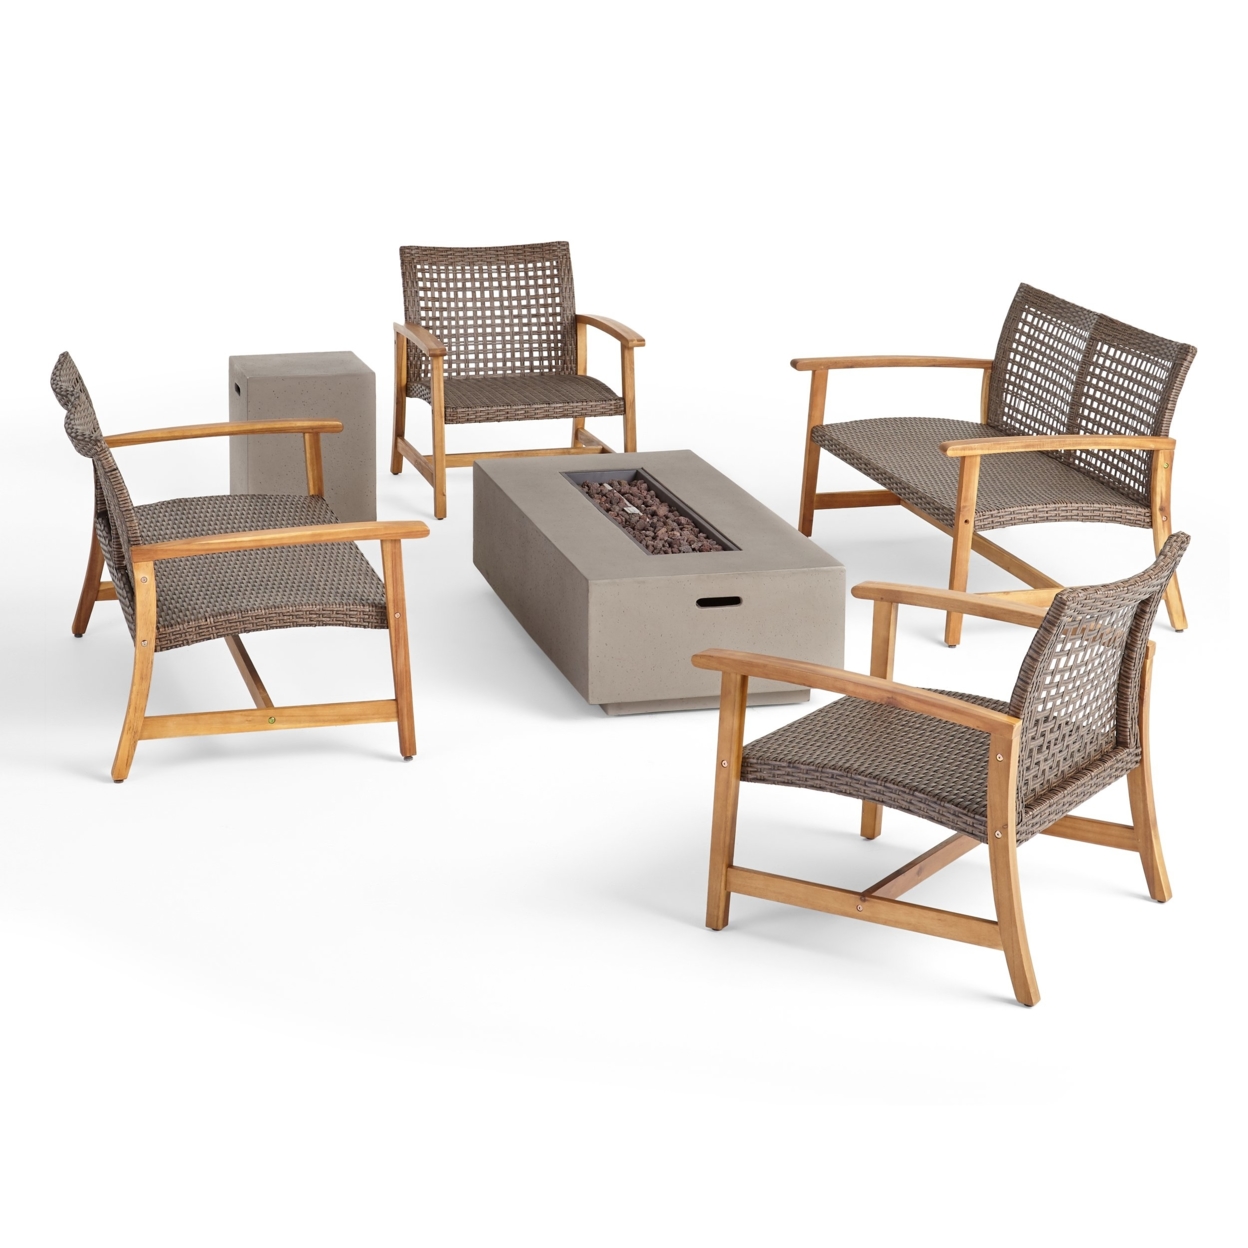 Allison Outdoor 6 Piece Wood And Wicker Chat Set With Fire Pit - Mixed Mocha, Natural Finish